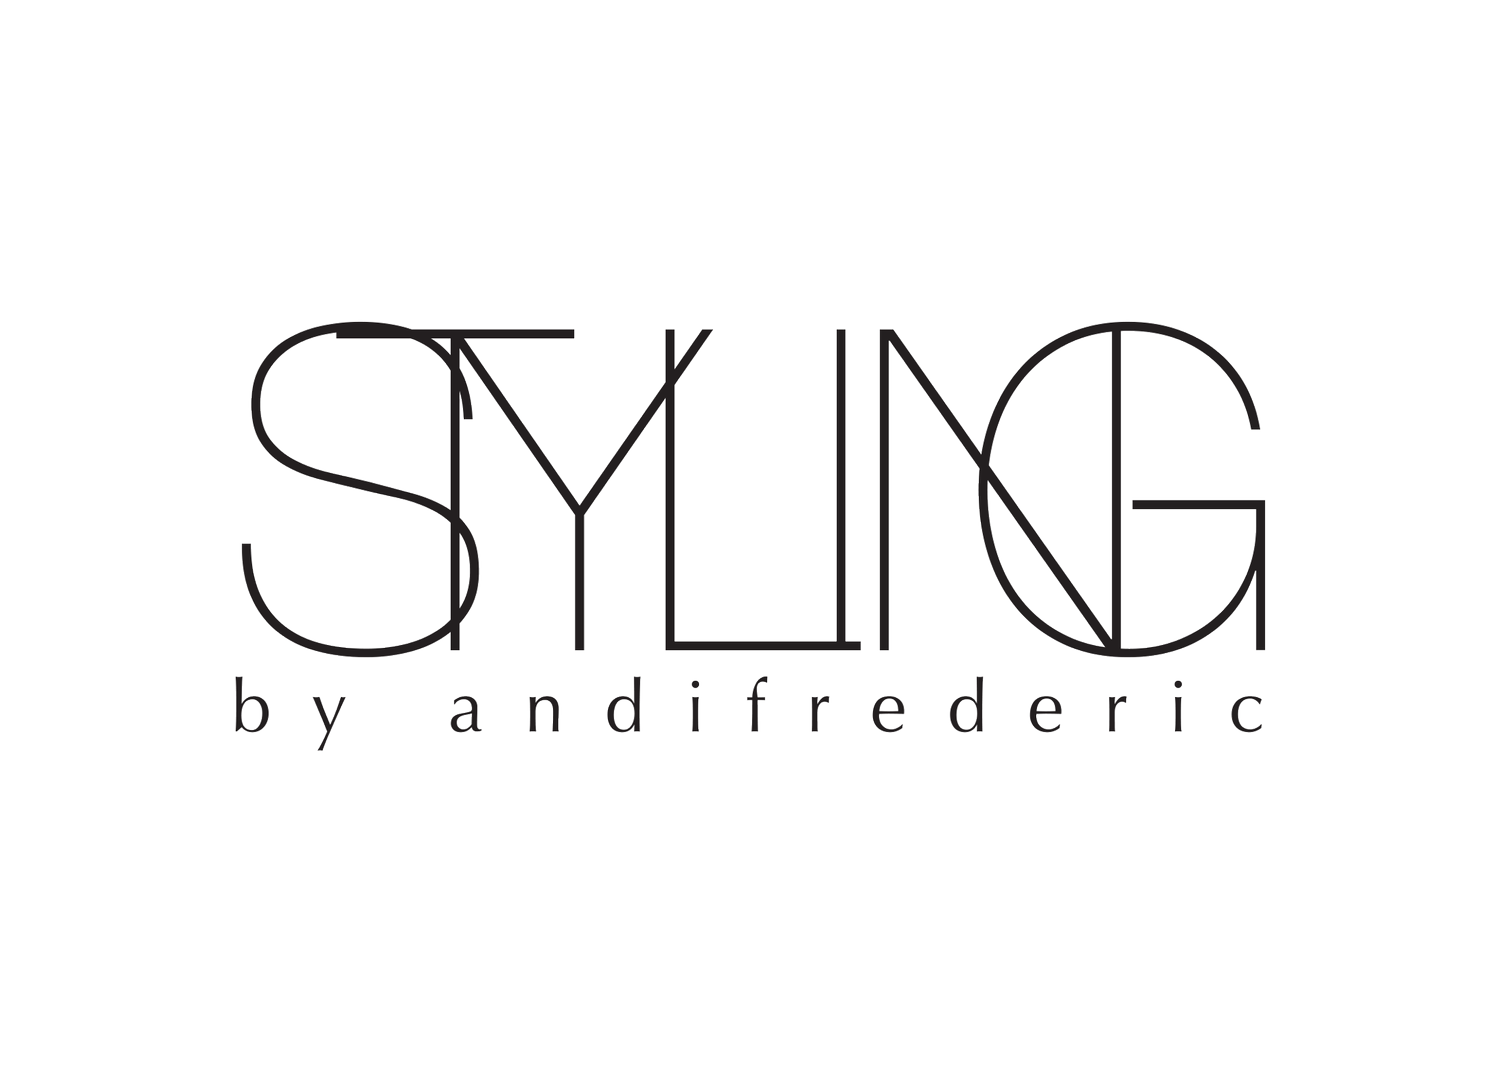 STYLING BY ANDI FREDERIC